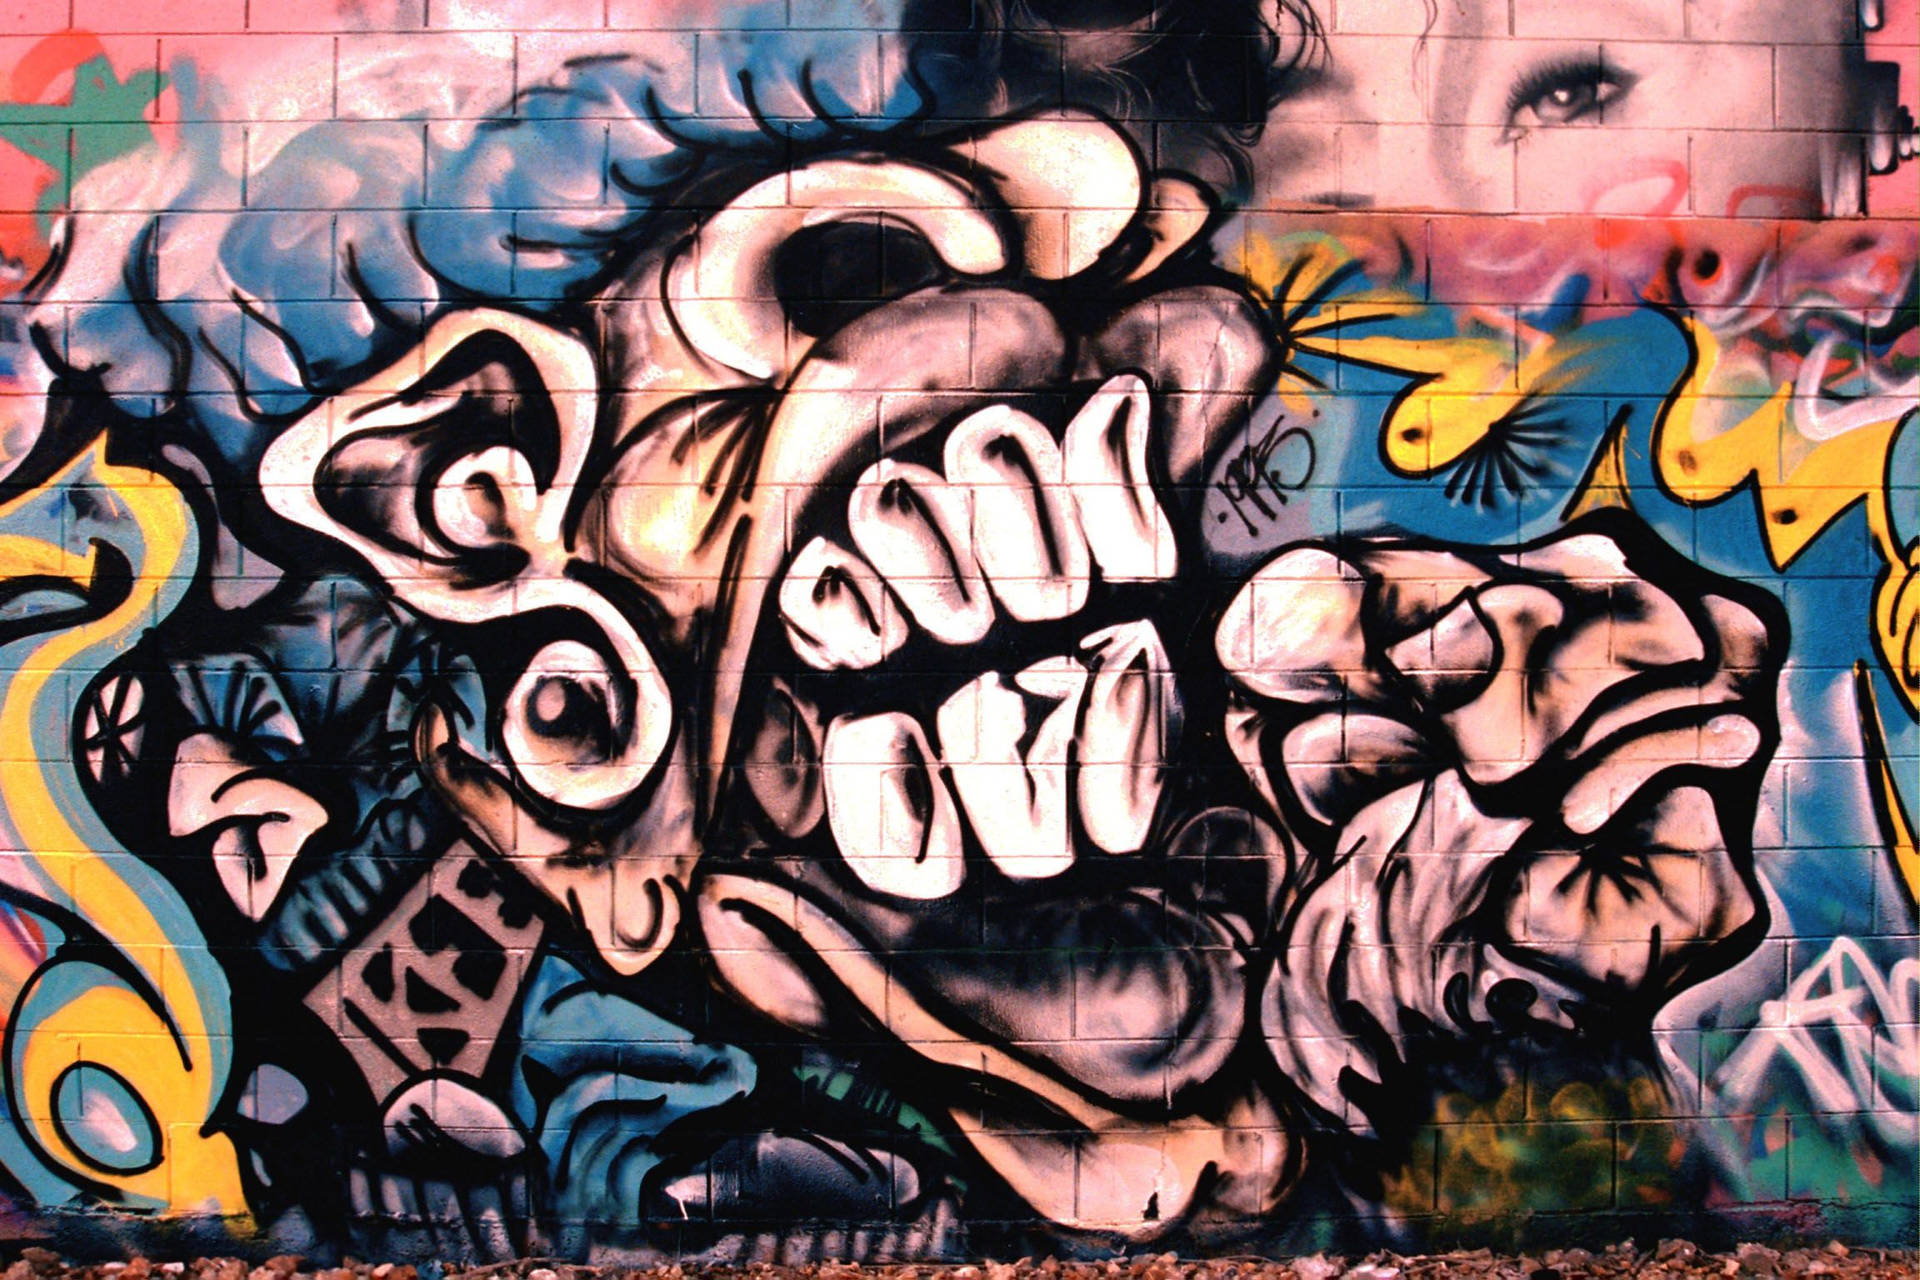 Graffiti wallpaper of huge human mouth with prominent teeth and female eye.